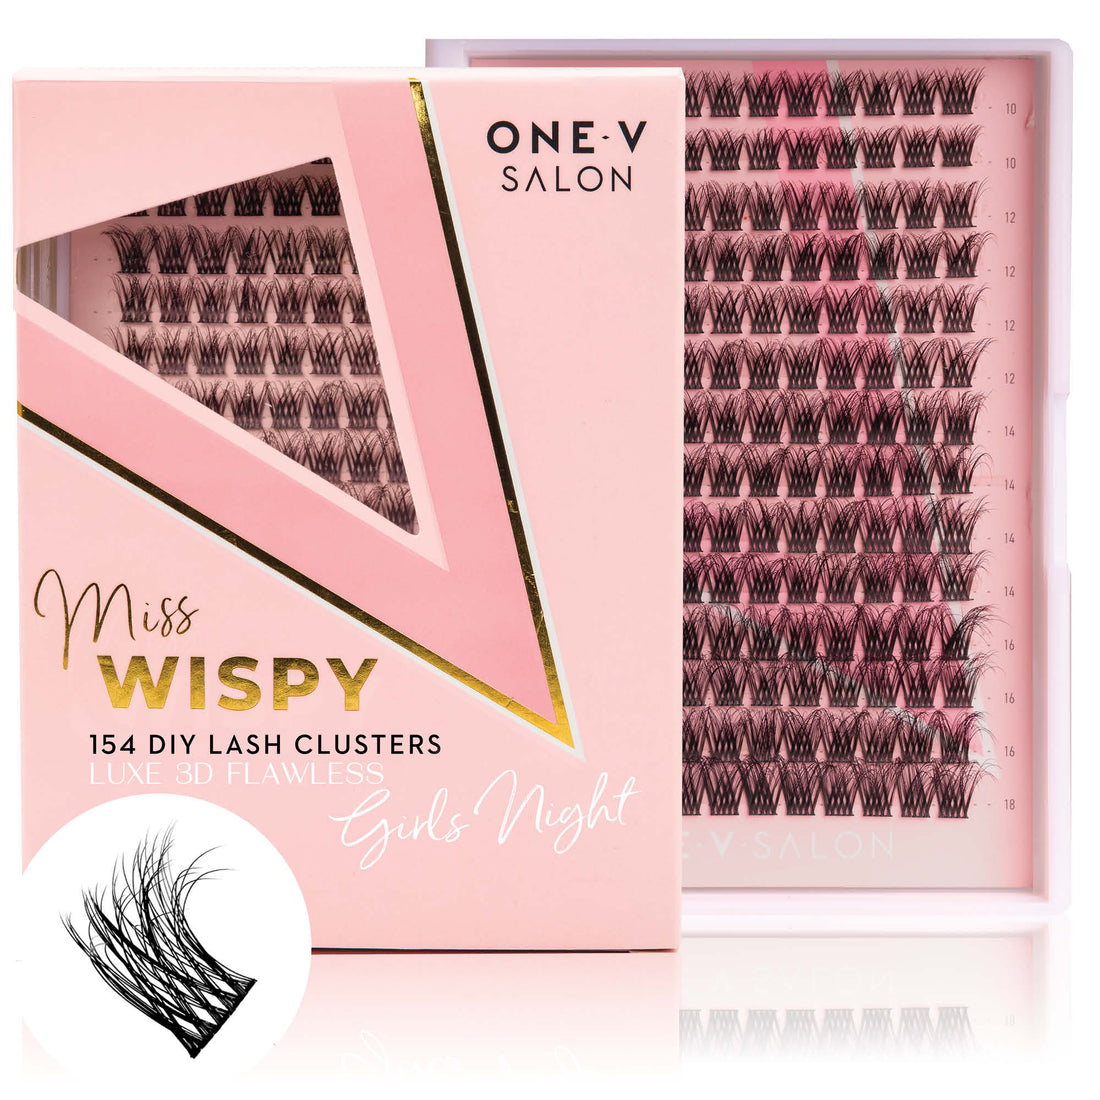 Luxe 3D Flawless - Girls Night - 168 DIY Cluster Lashes - LASH V